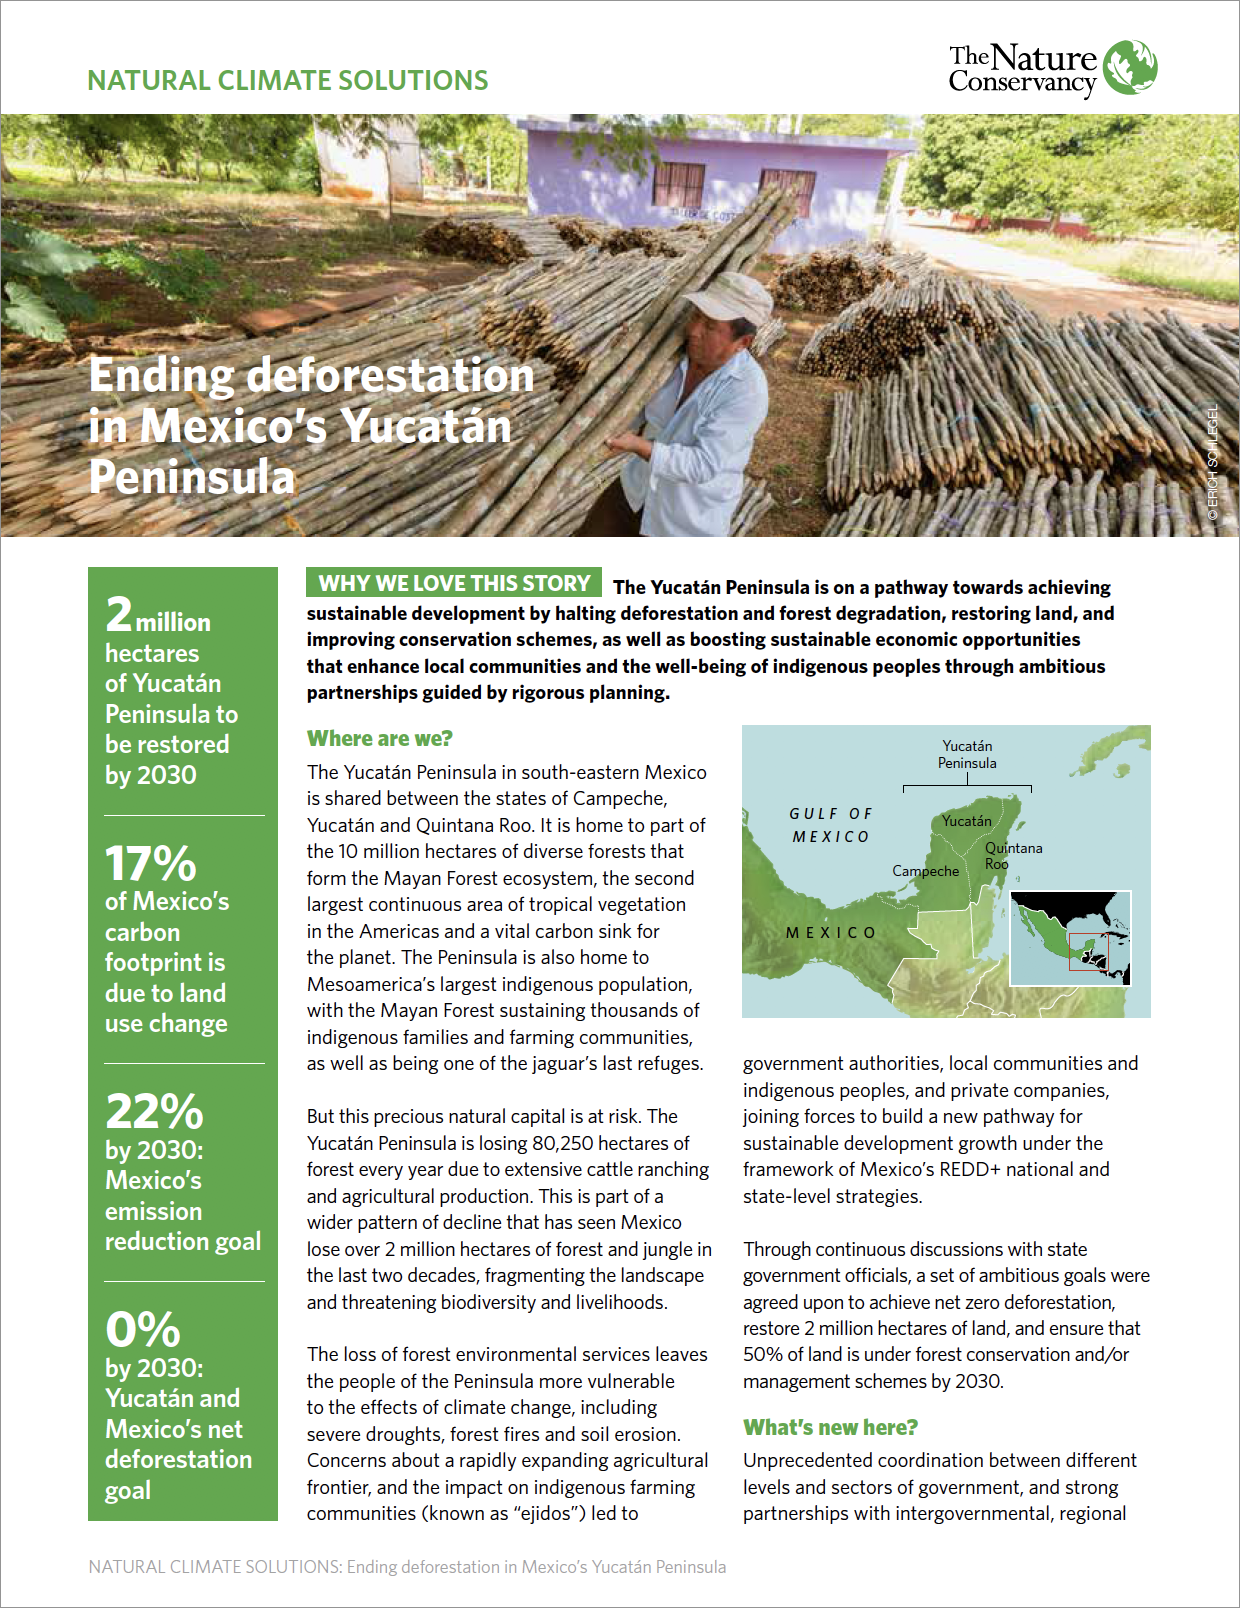 Natural Climate Solutions - Ending deforestation in Mexico's Yucatan Peninsula Case Study